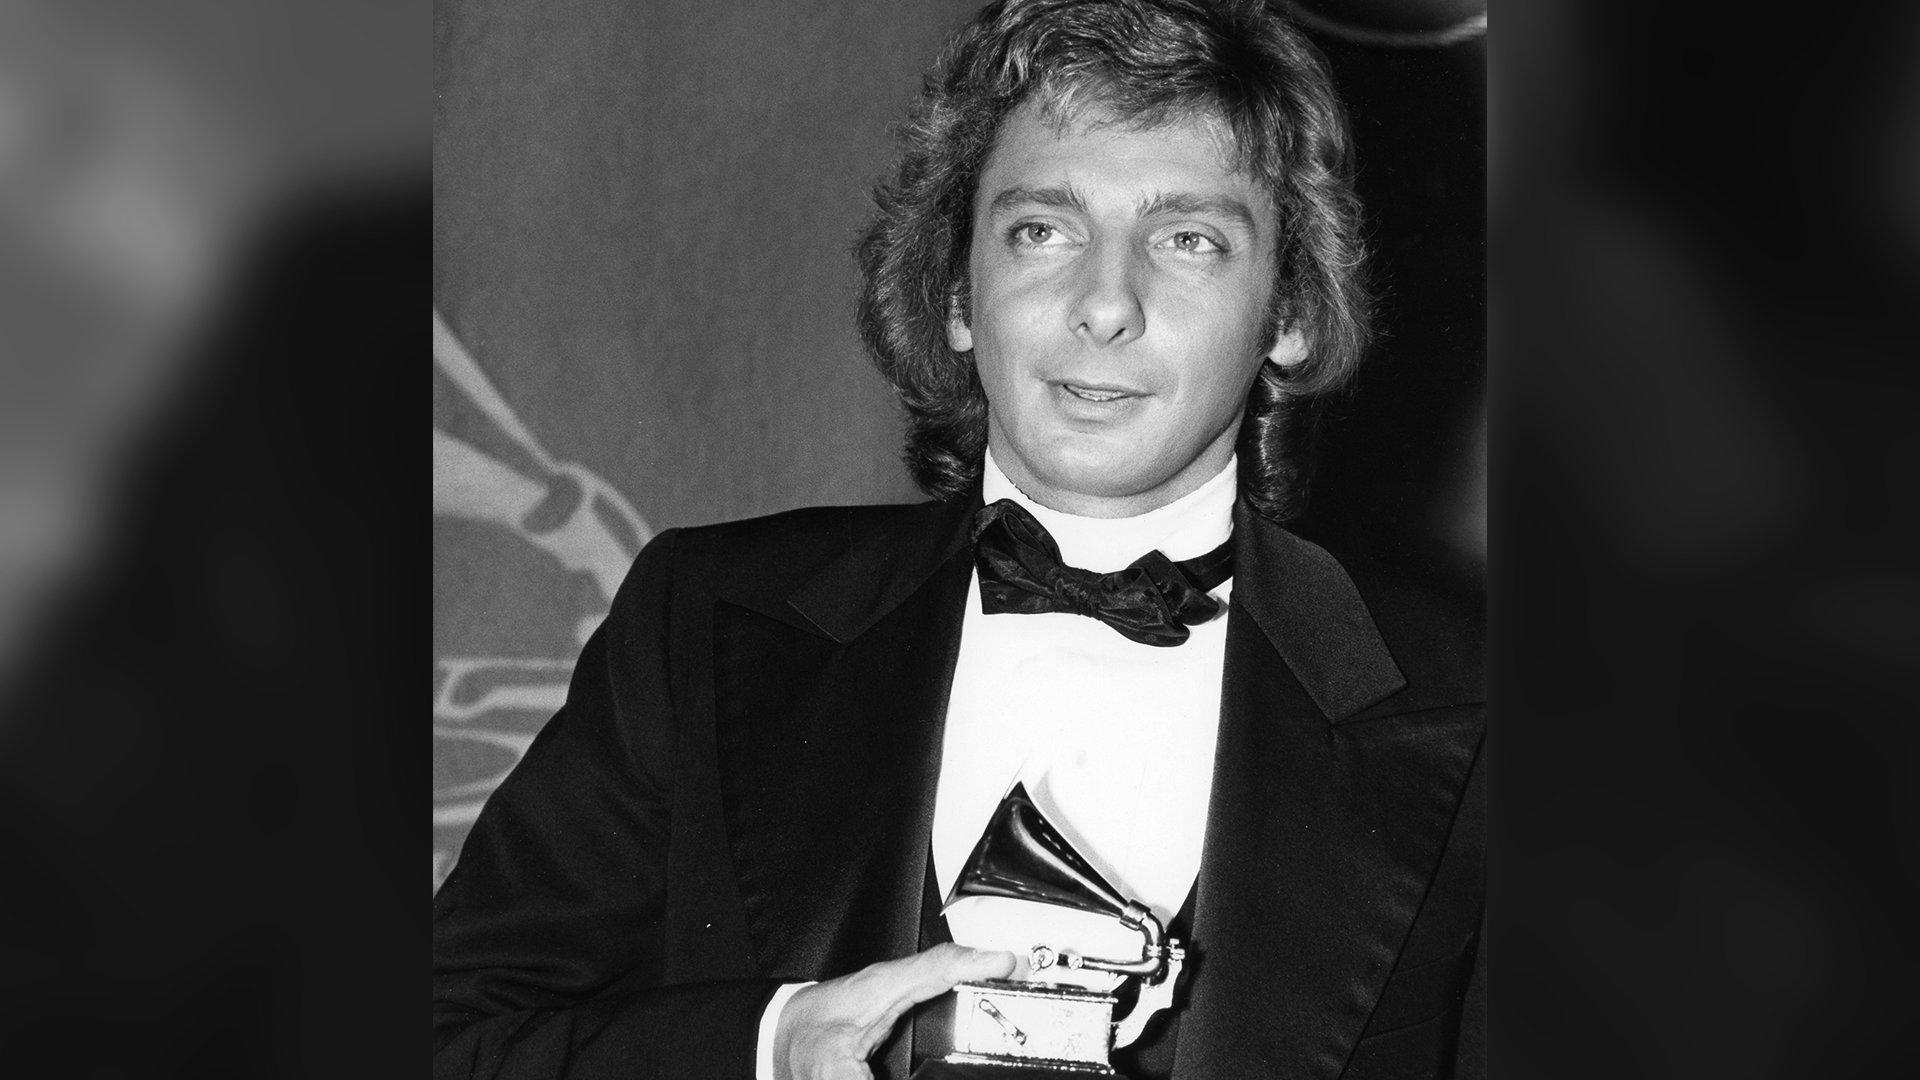 Barry Manilow at the 1979 GRAMMYs